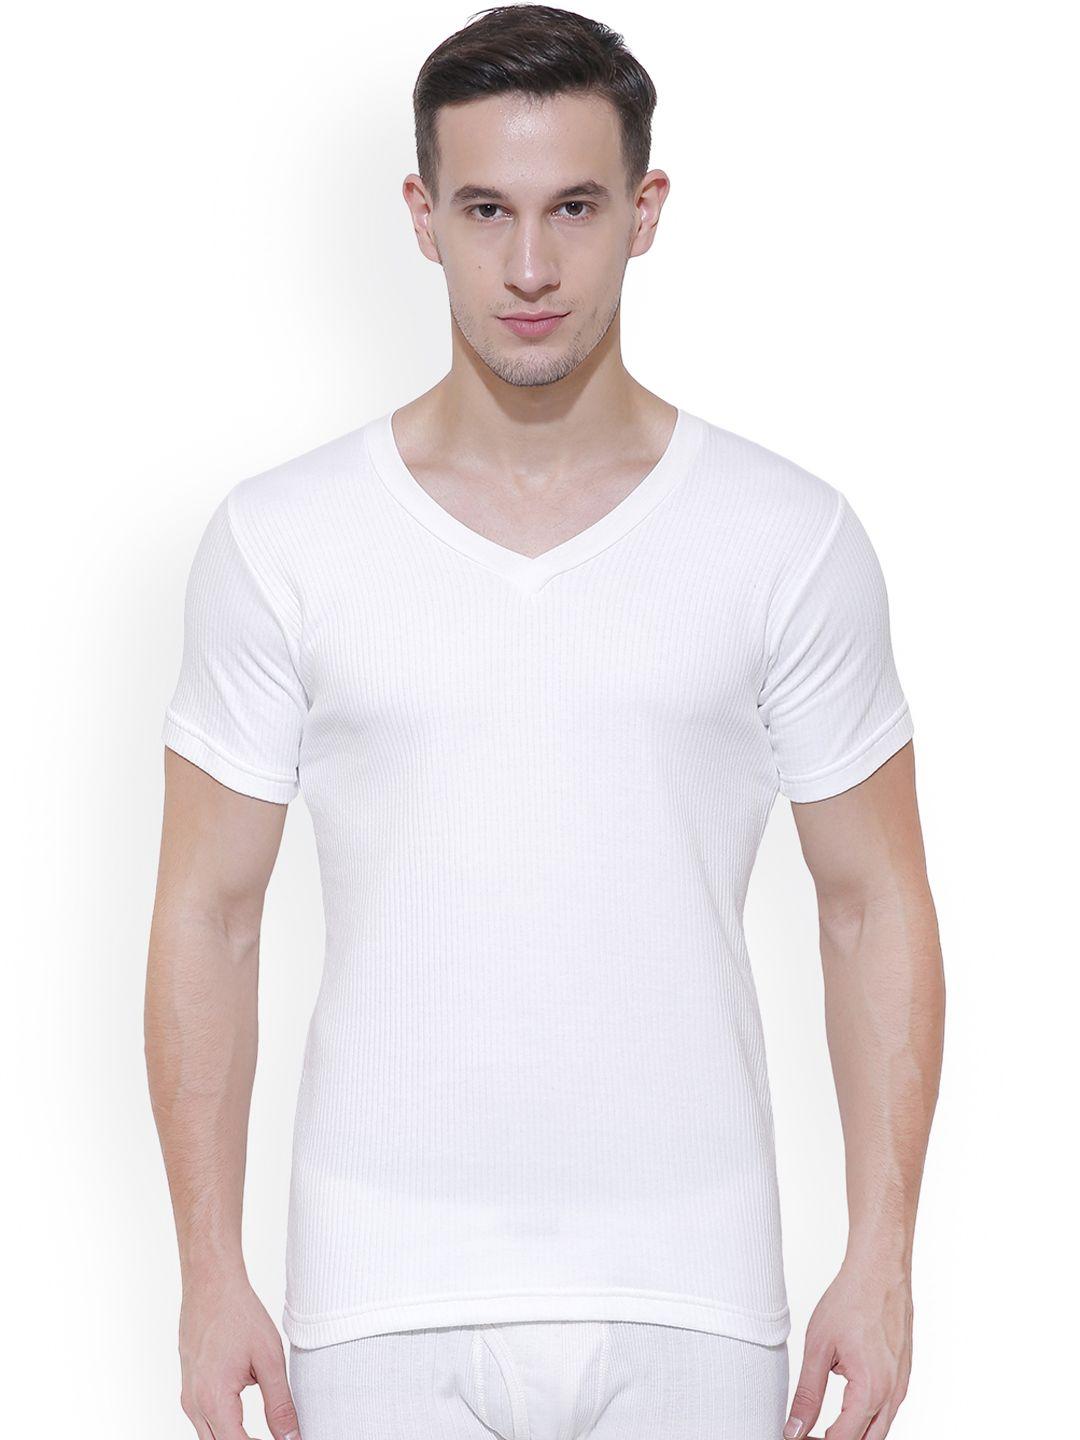 bodycare insider men off-white solid thermal top b103_80